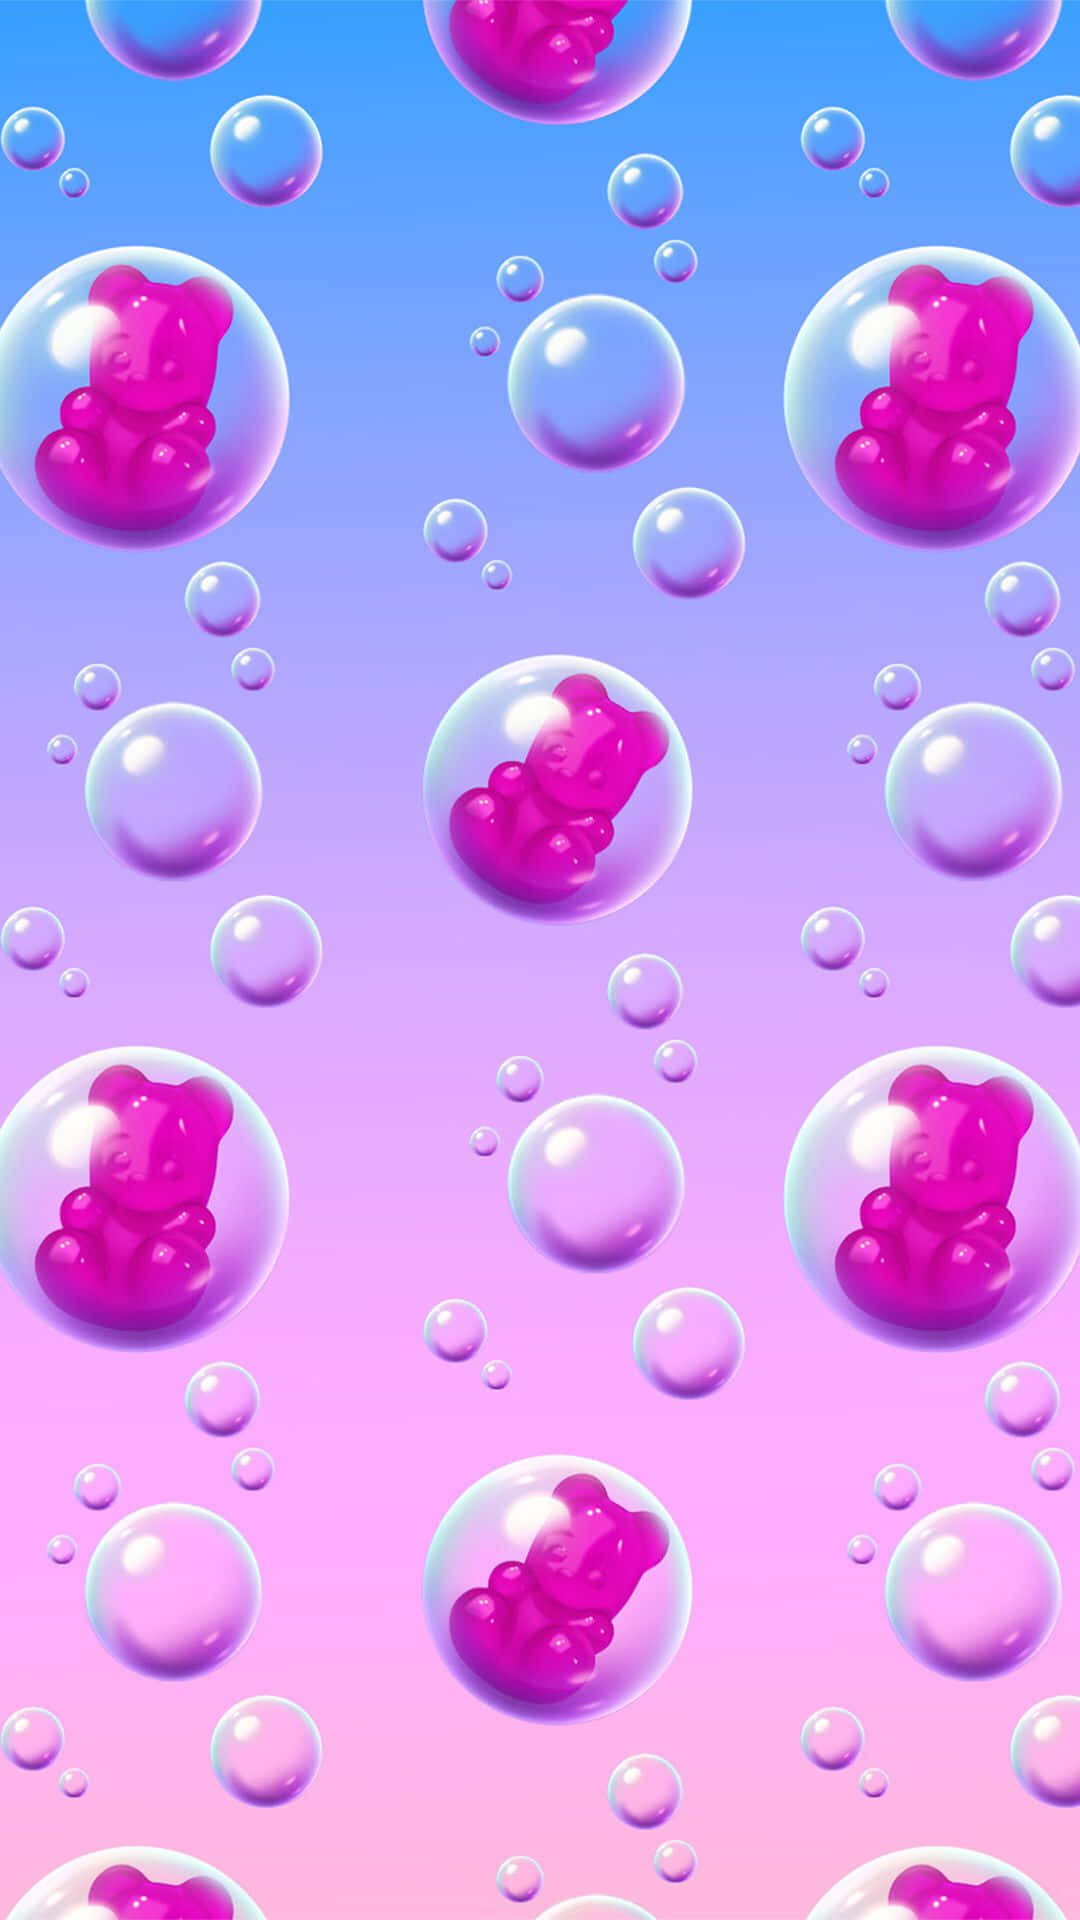 Bubbles On A Pink And Blue Background Wallpaper